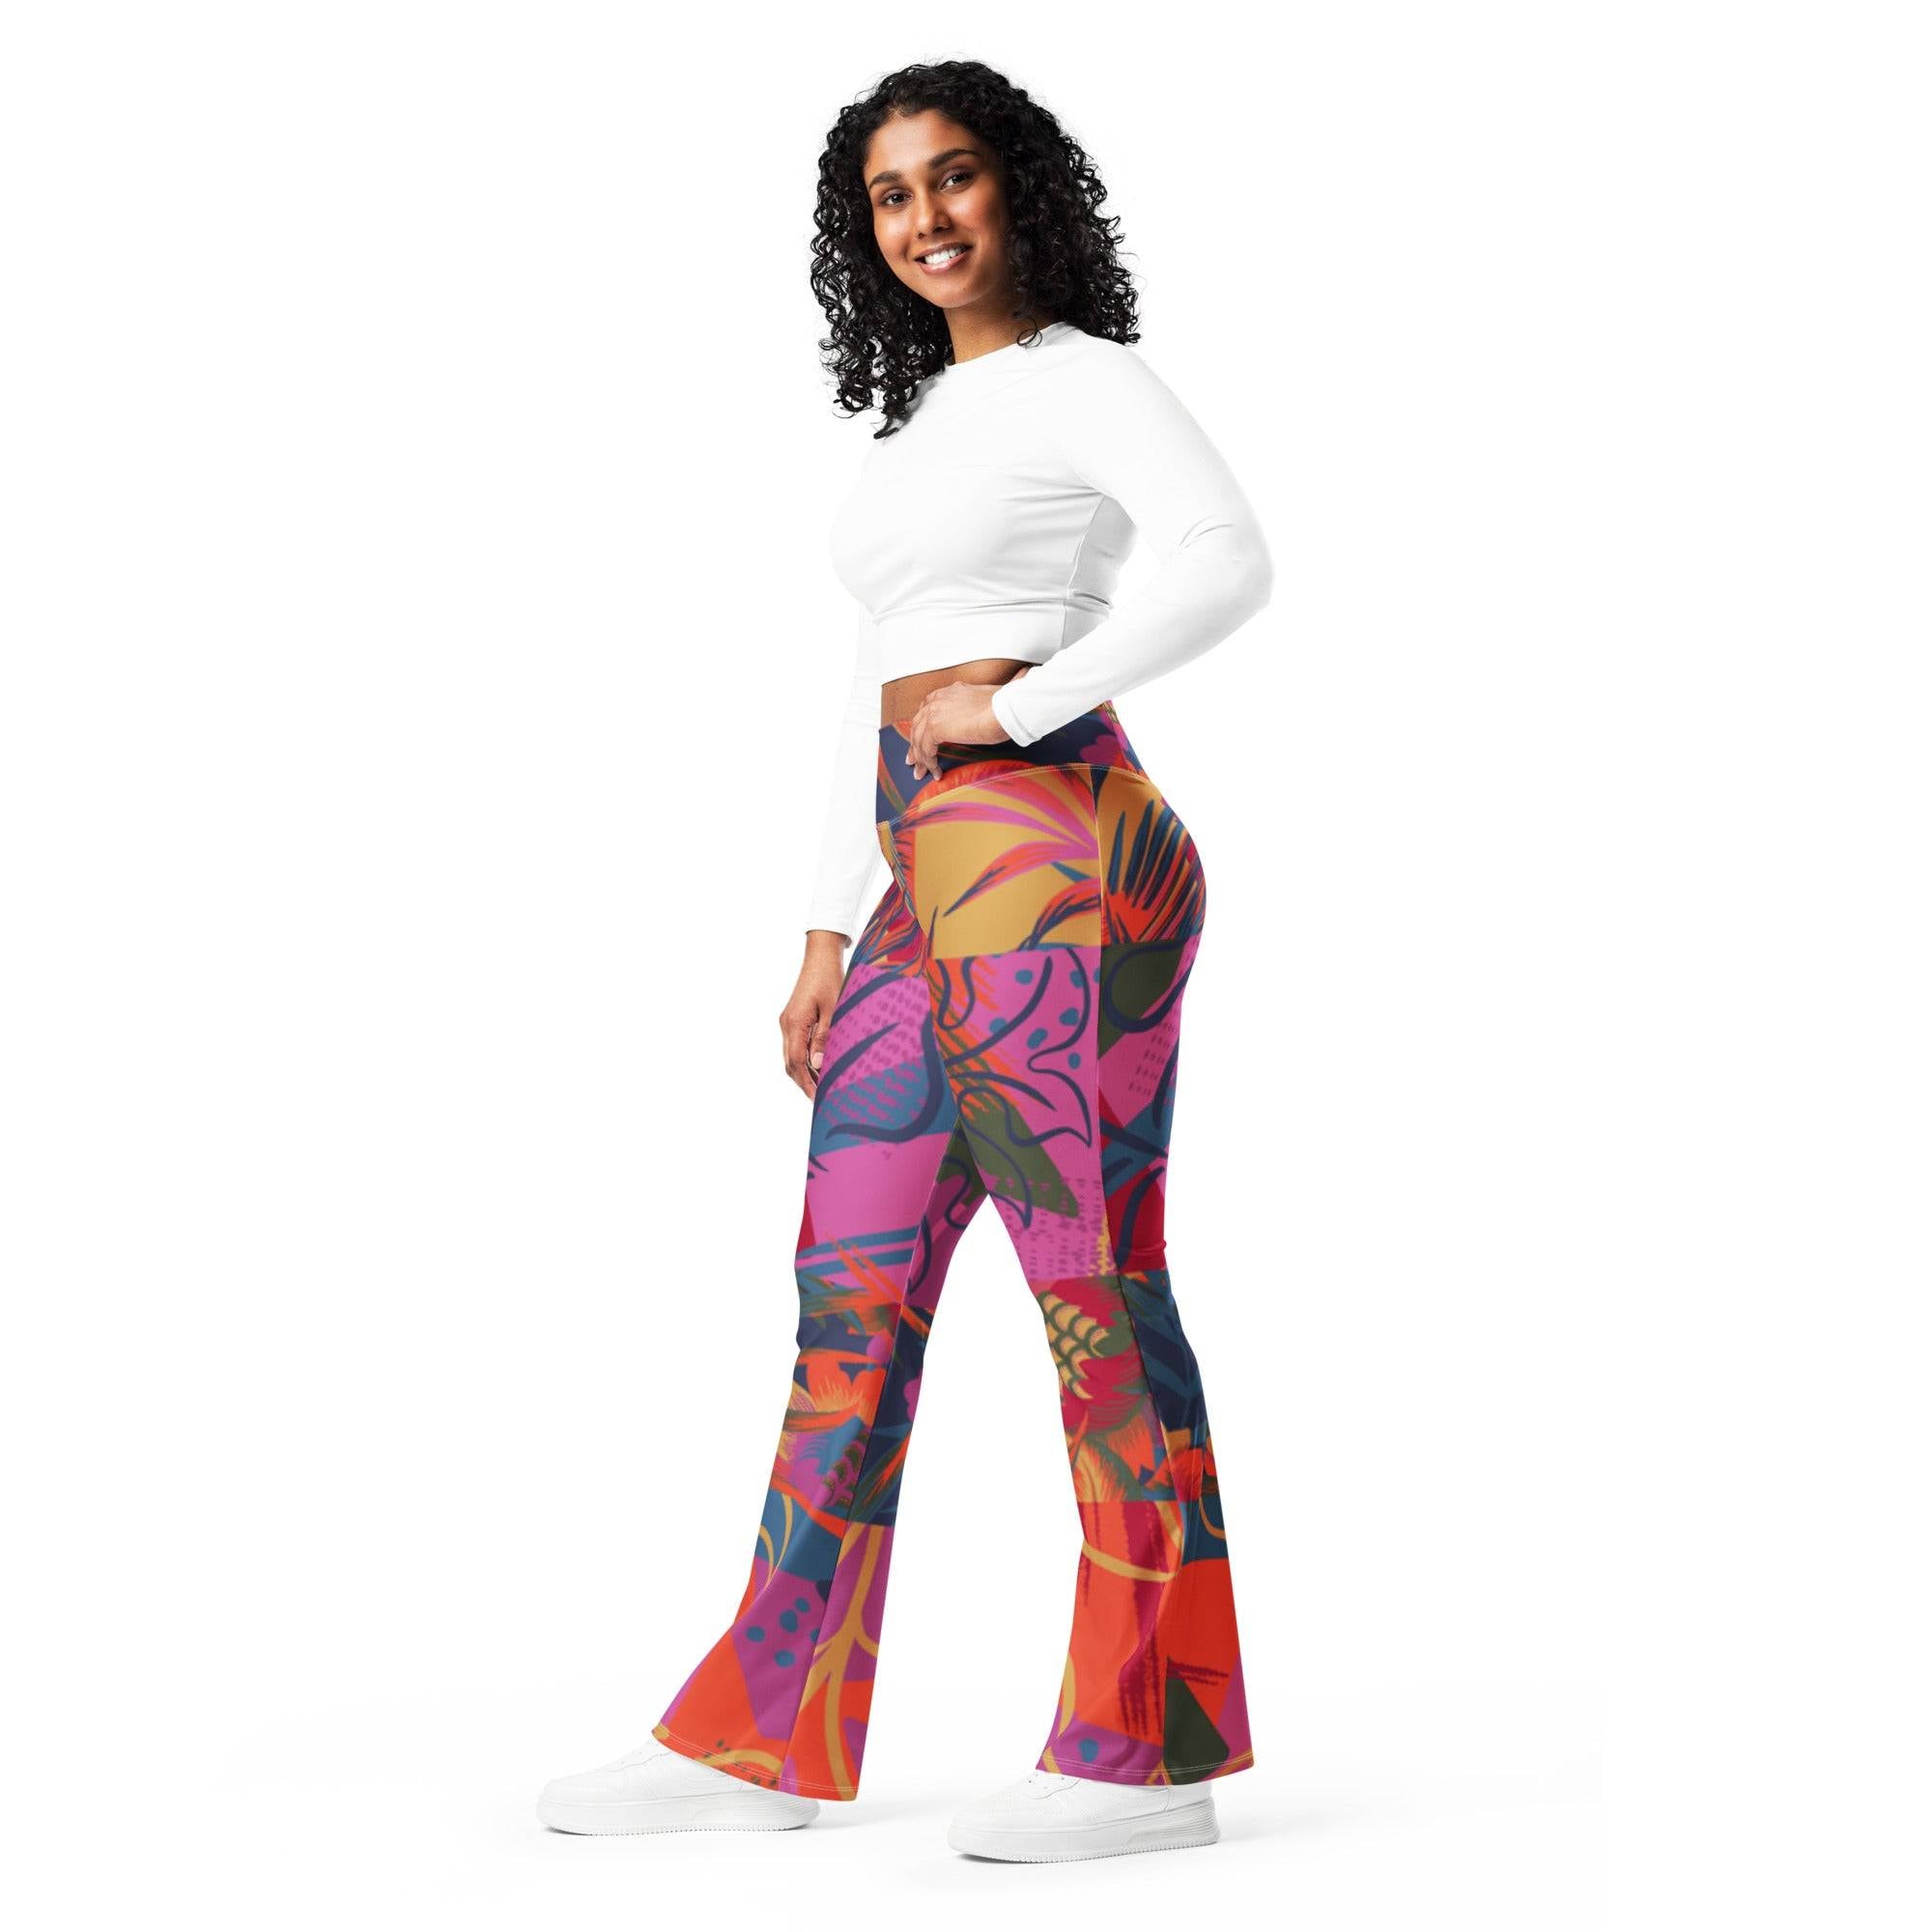 Flare Patterned Leggings. These patterned flare leggings feature a high waist and back pocket. Enhance your curves in all the right places with this trendsetting flare cut.  Explore today.